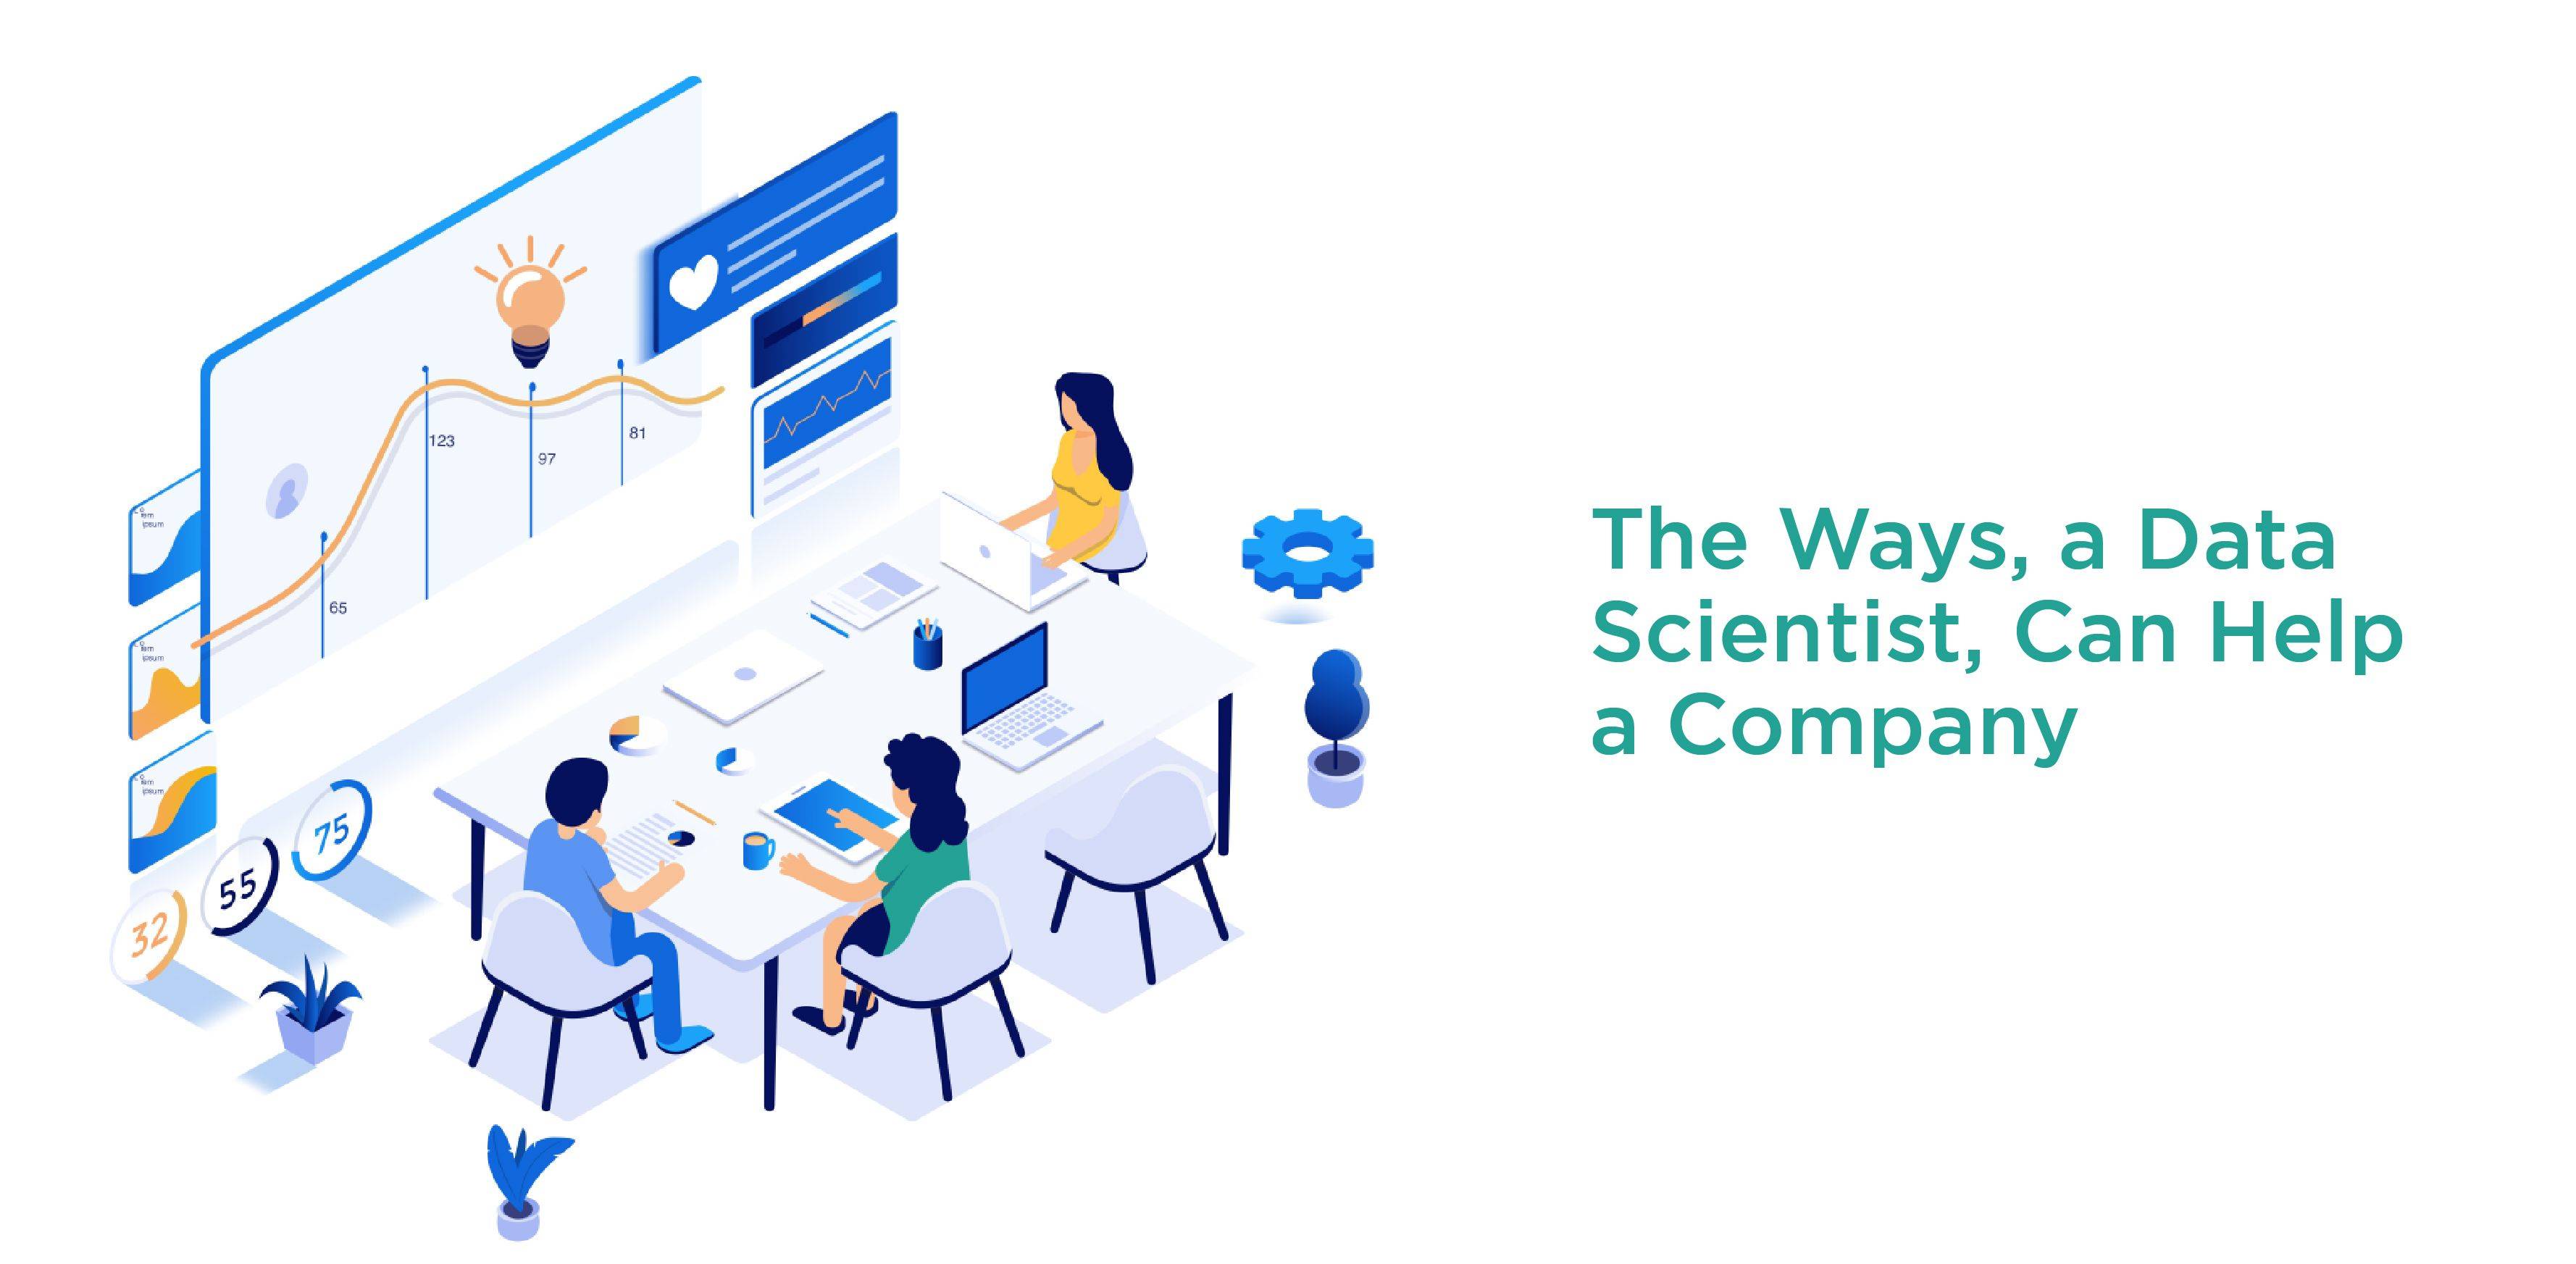 Why is Data Science important? The Ways, a Data Scientist, Can Help a Company